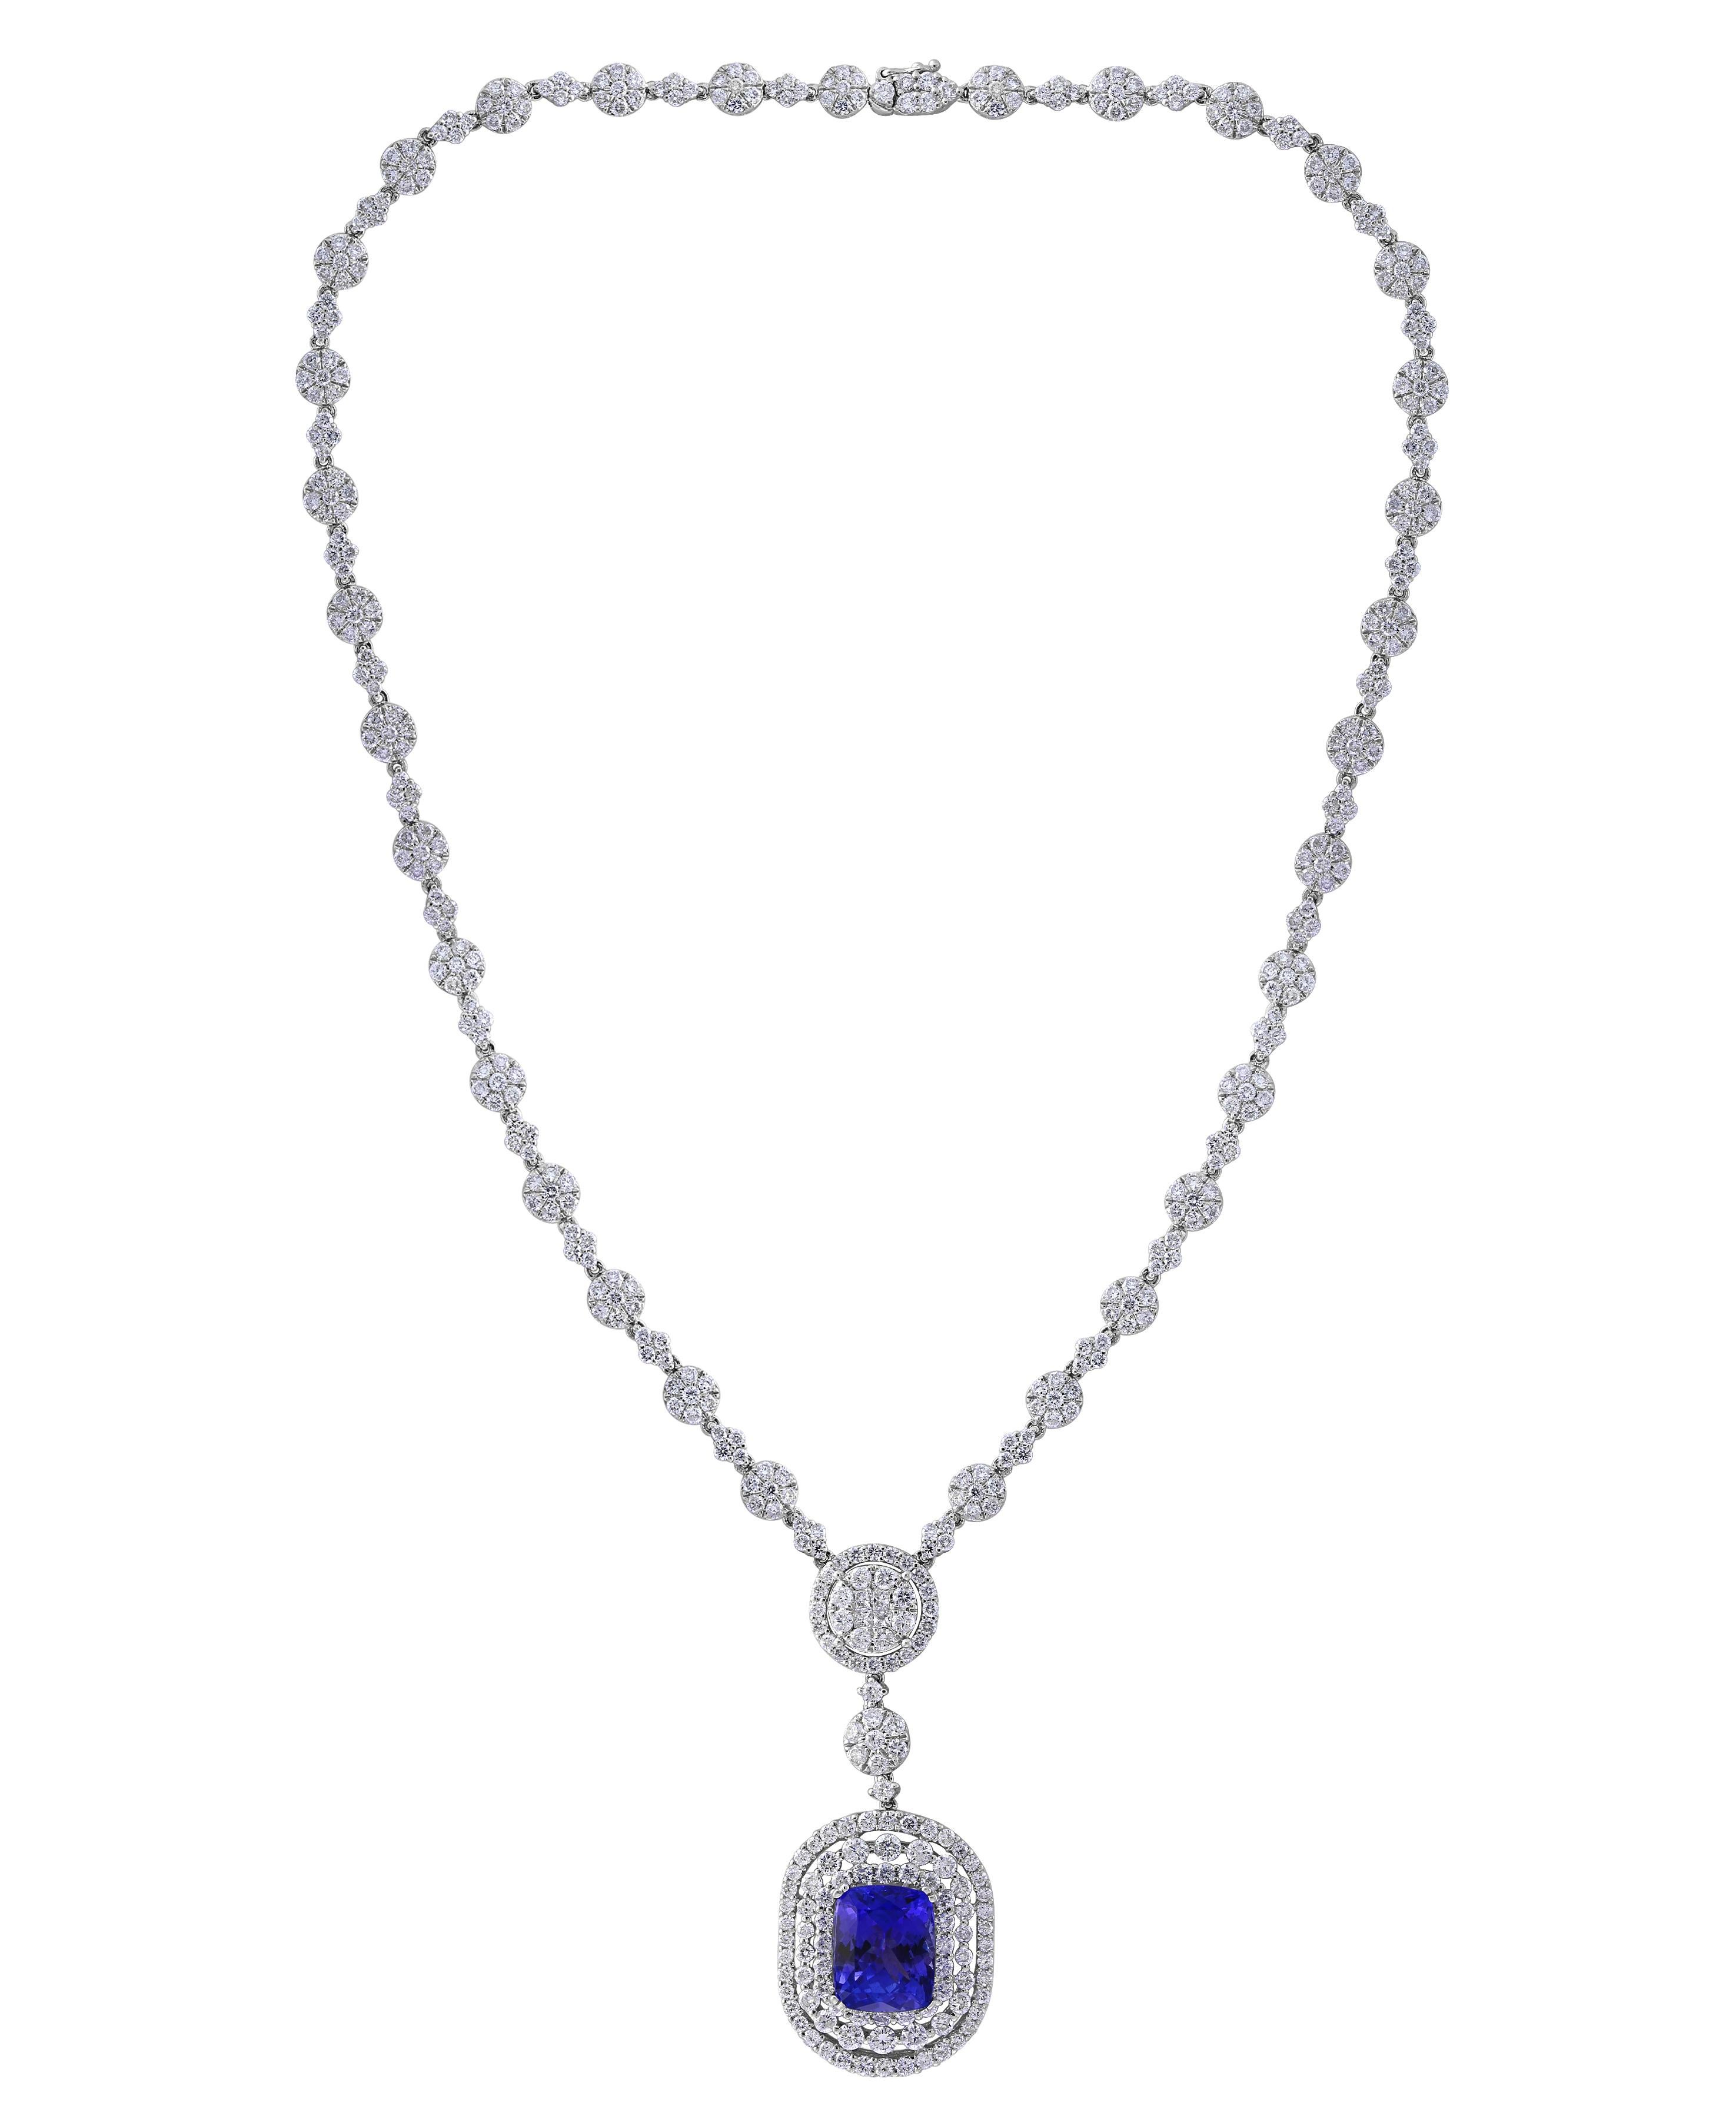 7 carats of fine  quality of   Cushion Shape Tanzanite pendant surrounded by brilliant round  cut Diamonds all mounted in 18 karat White  gold. Weight of the necklace is 24 Grams . 
Tanzanite Weight  Approximately  7 Carats
Diamond Weight 